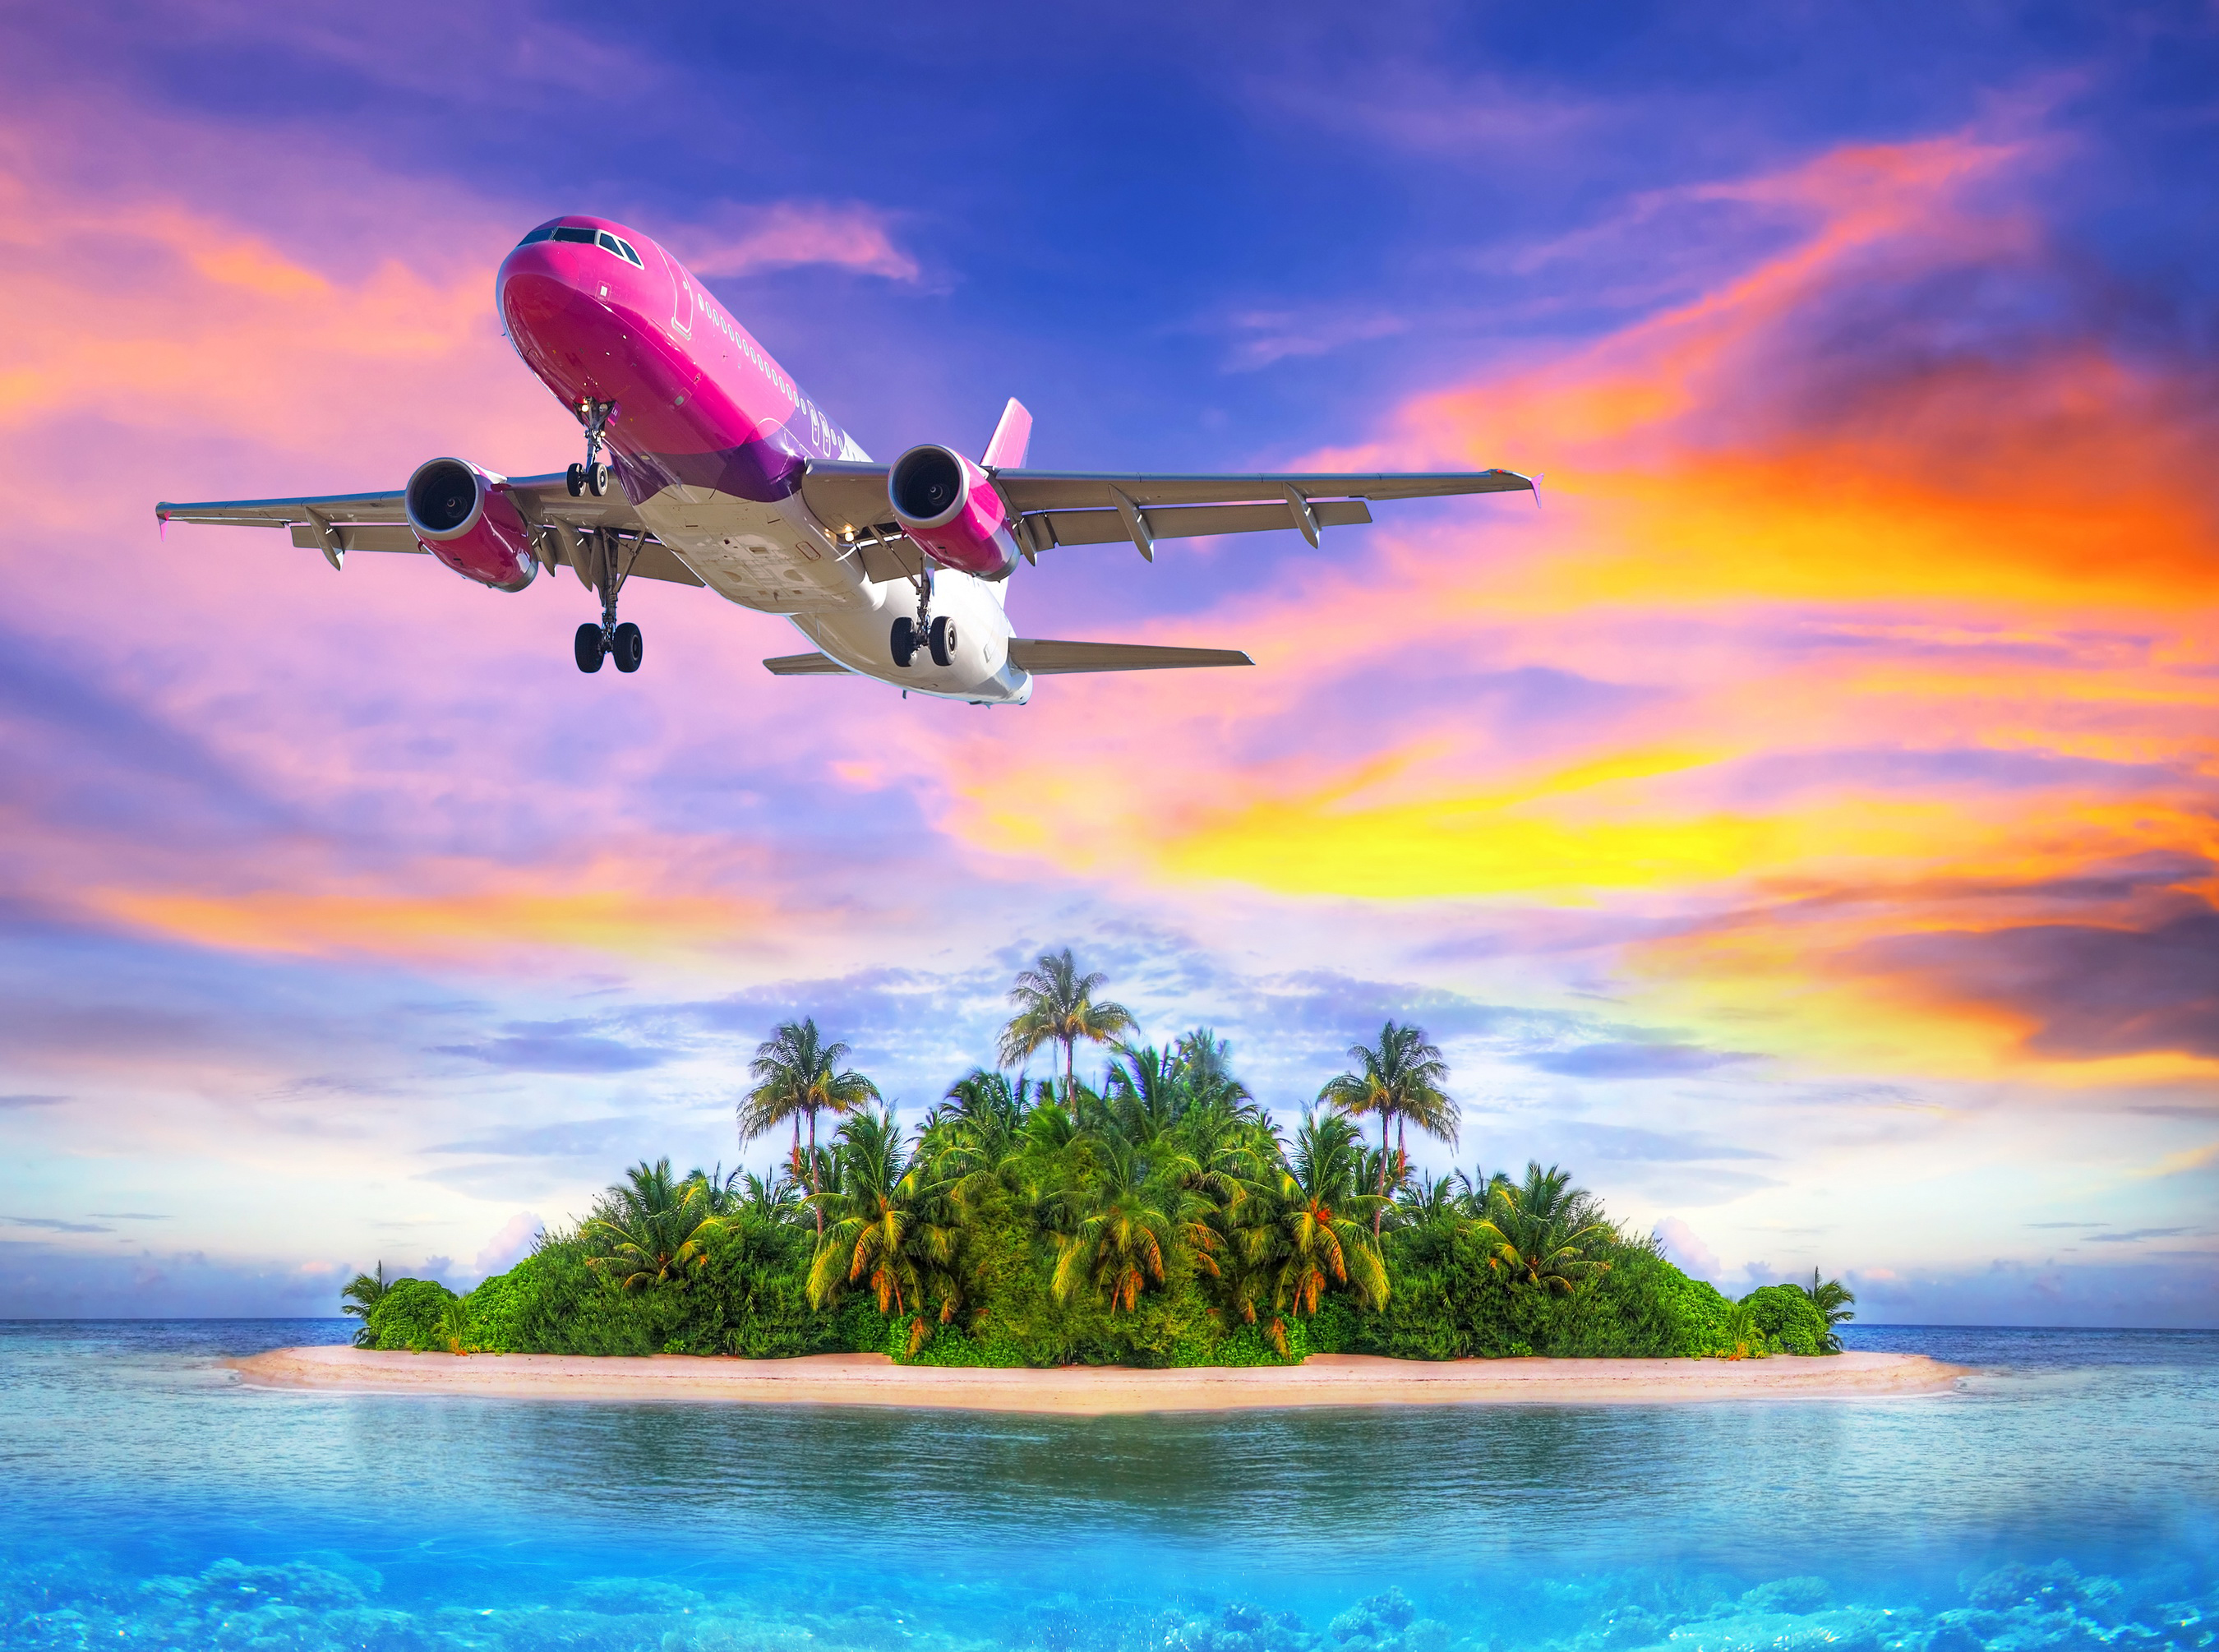 Airbus A320 Airplane Island Ocean Palm Tree Sky Sunset Tropical Orange Color 2700x2010